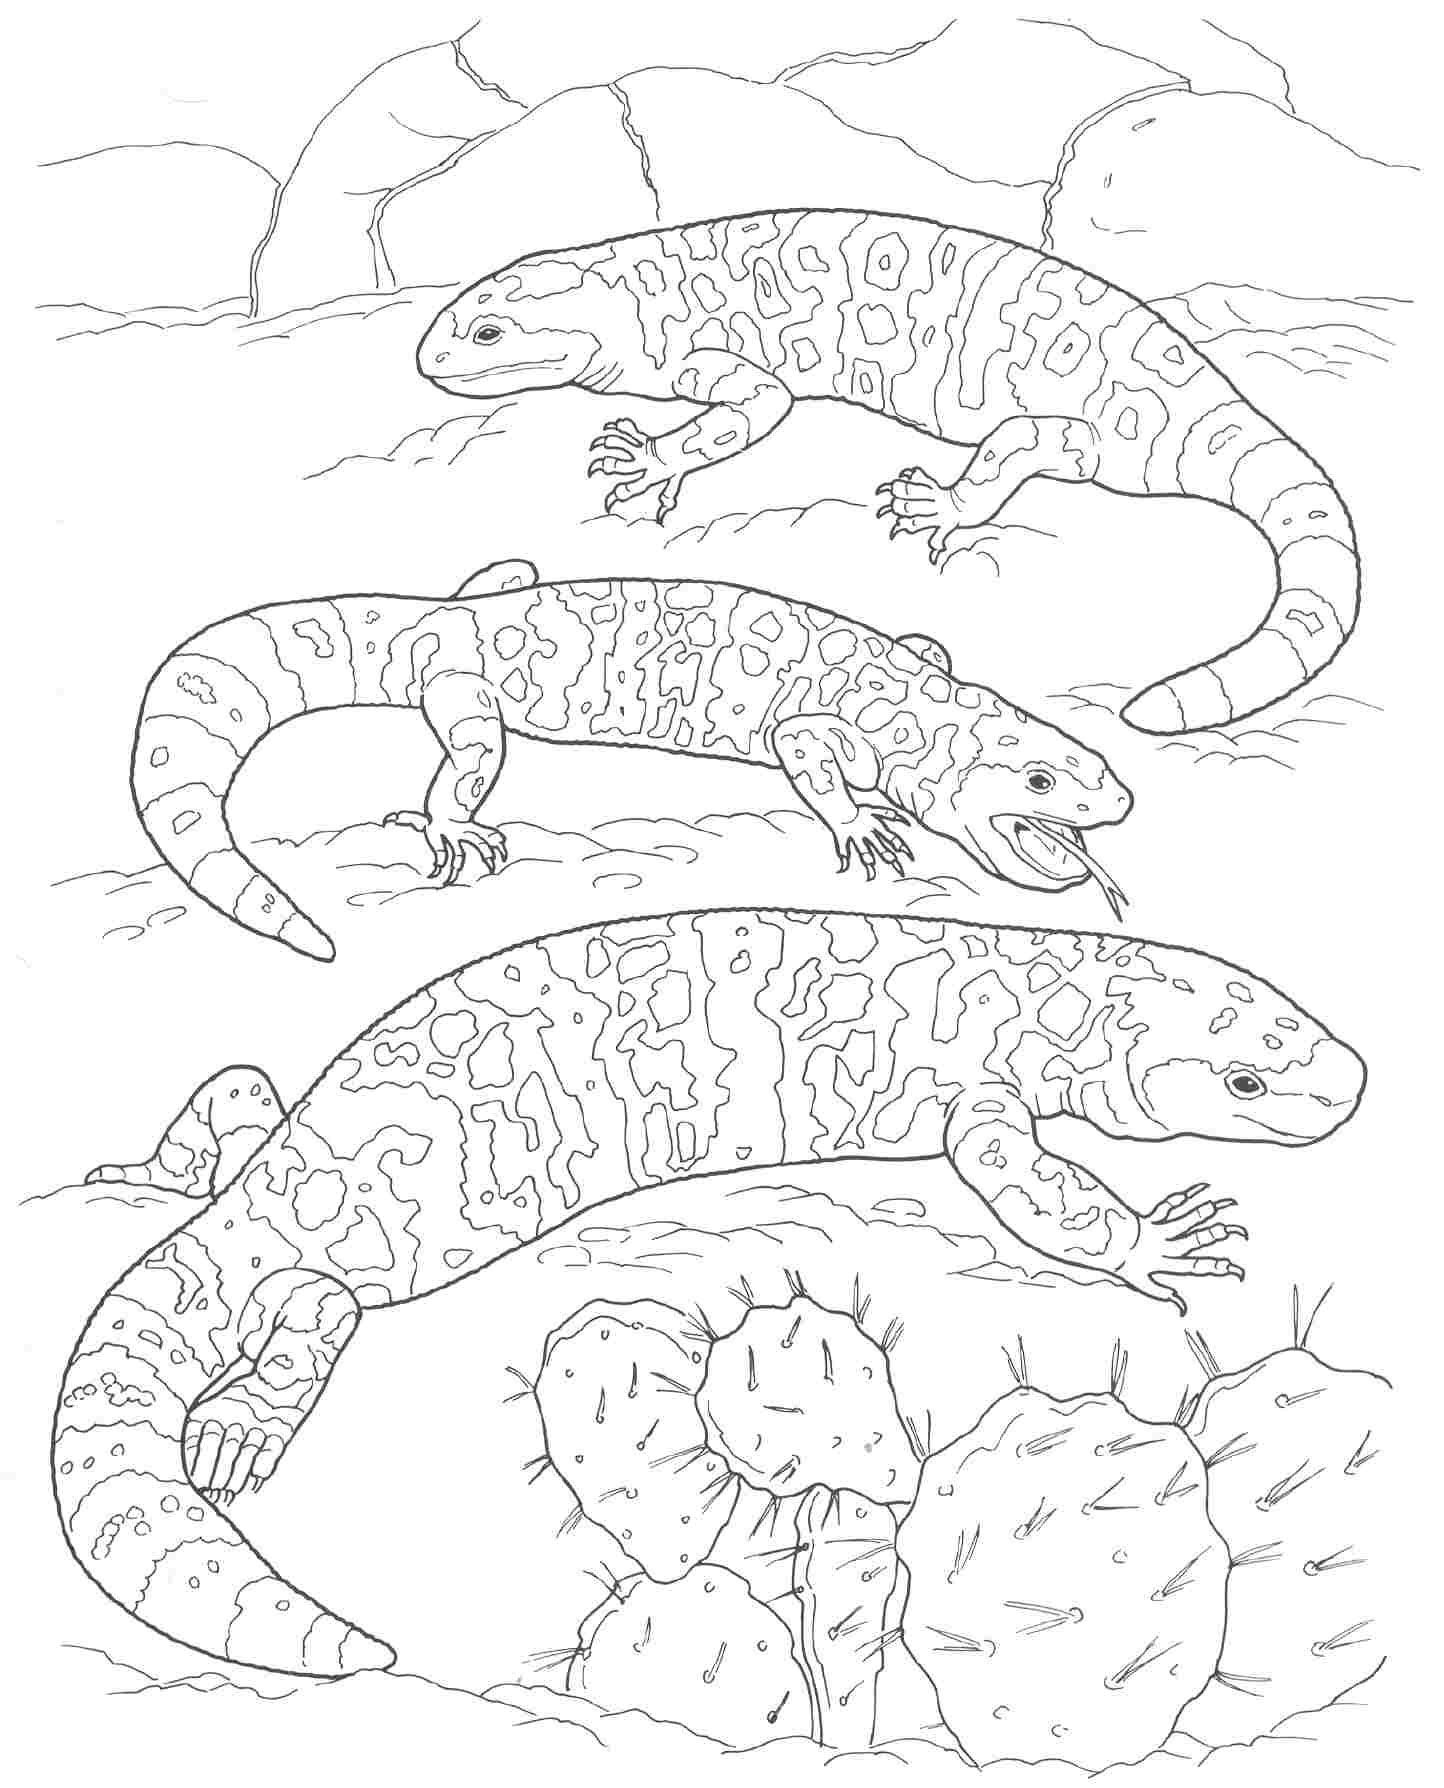 Desert Animals And Plants Coloring Pages - Coloring Page